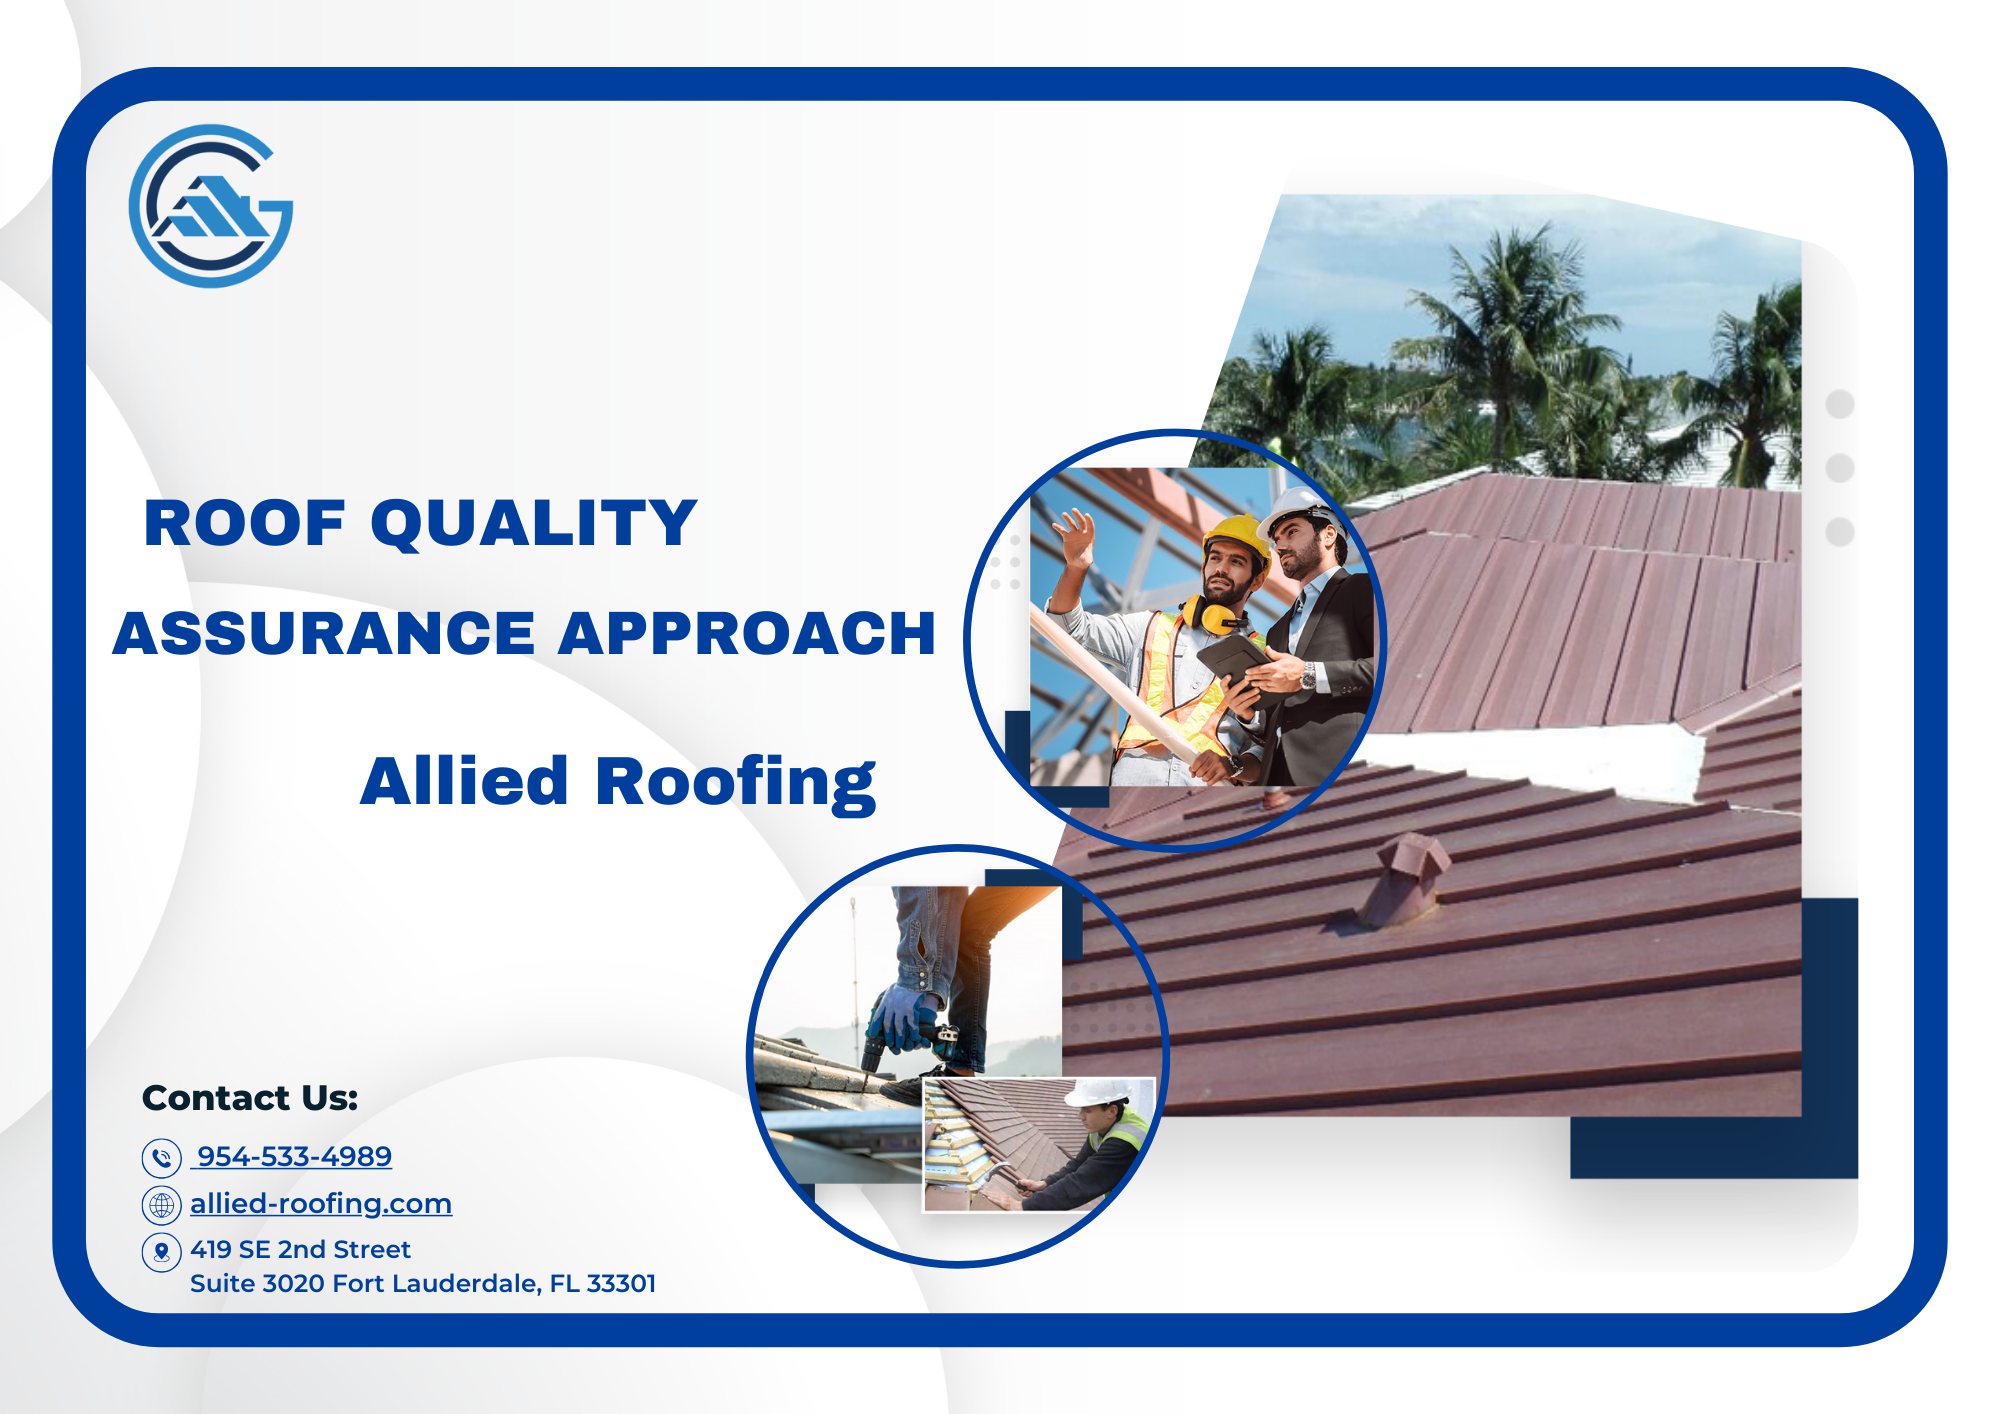 roof quality assurance approach - allied roofing